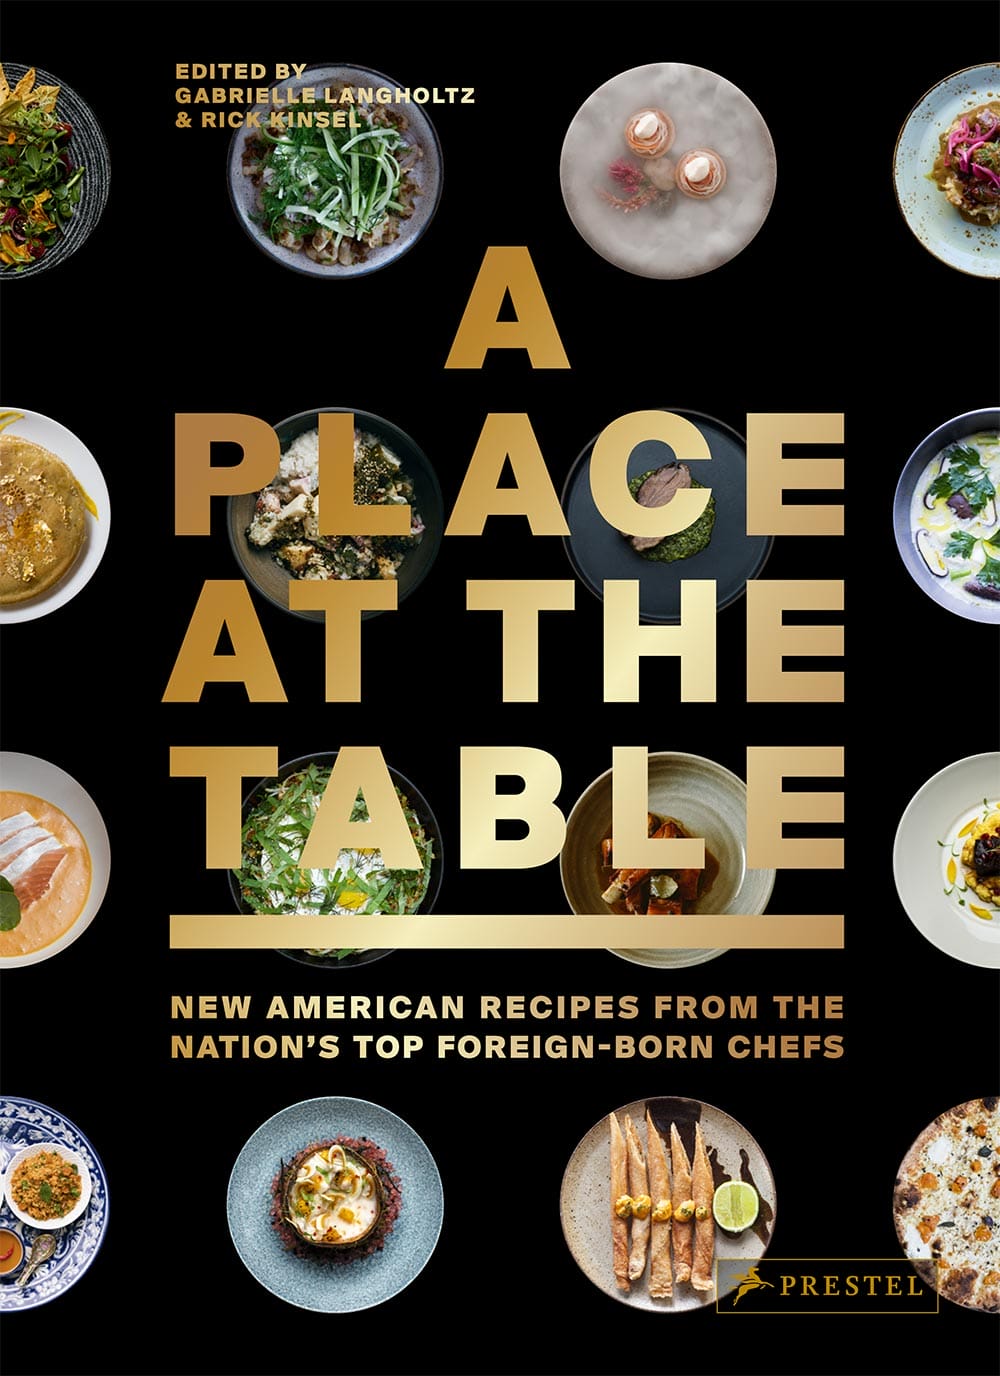 A Place At The Table book cover.